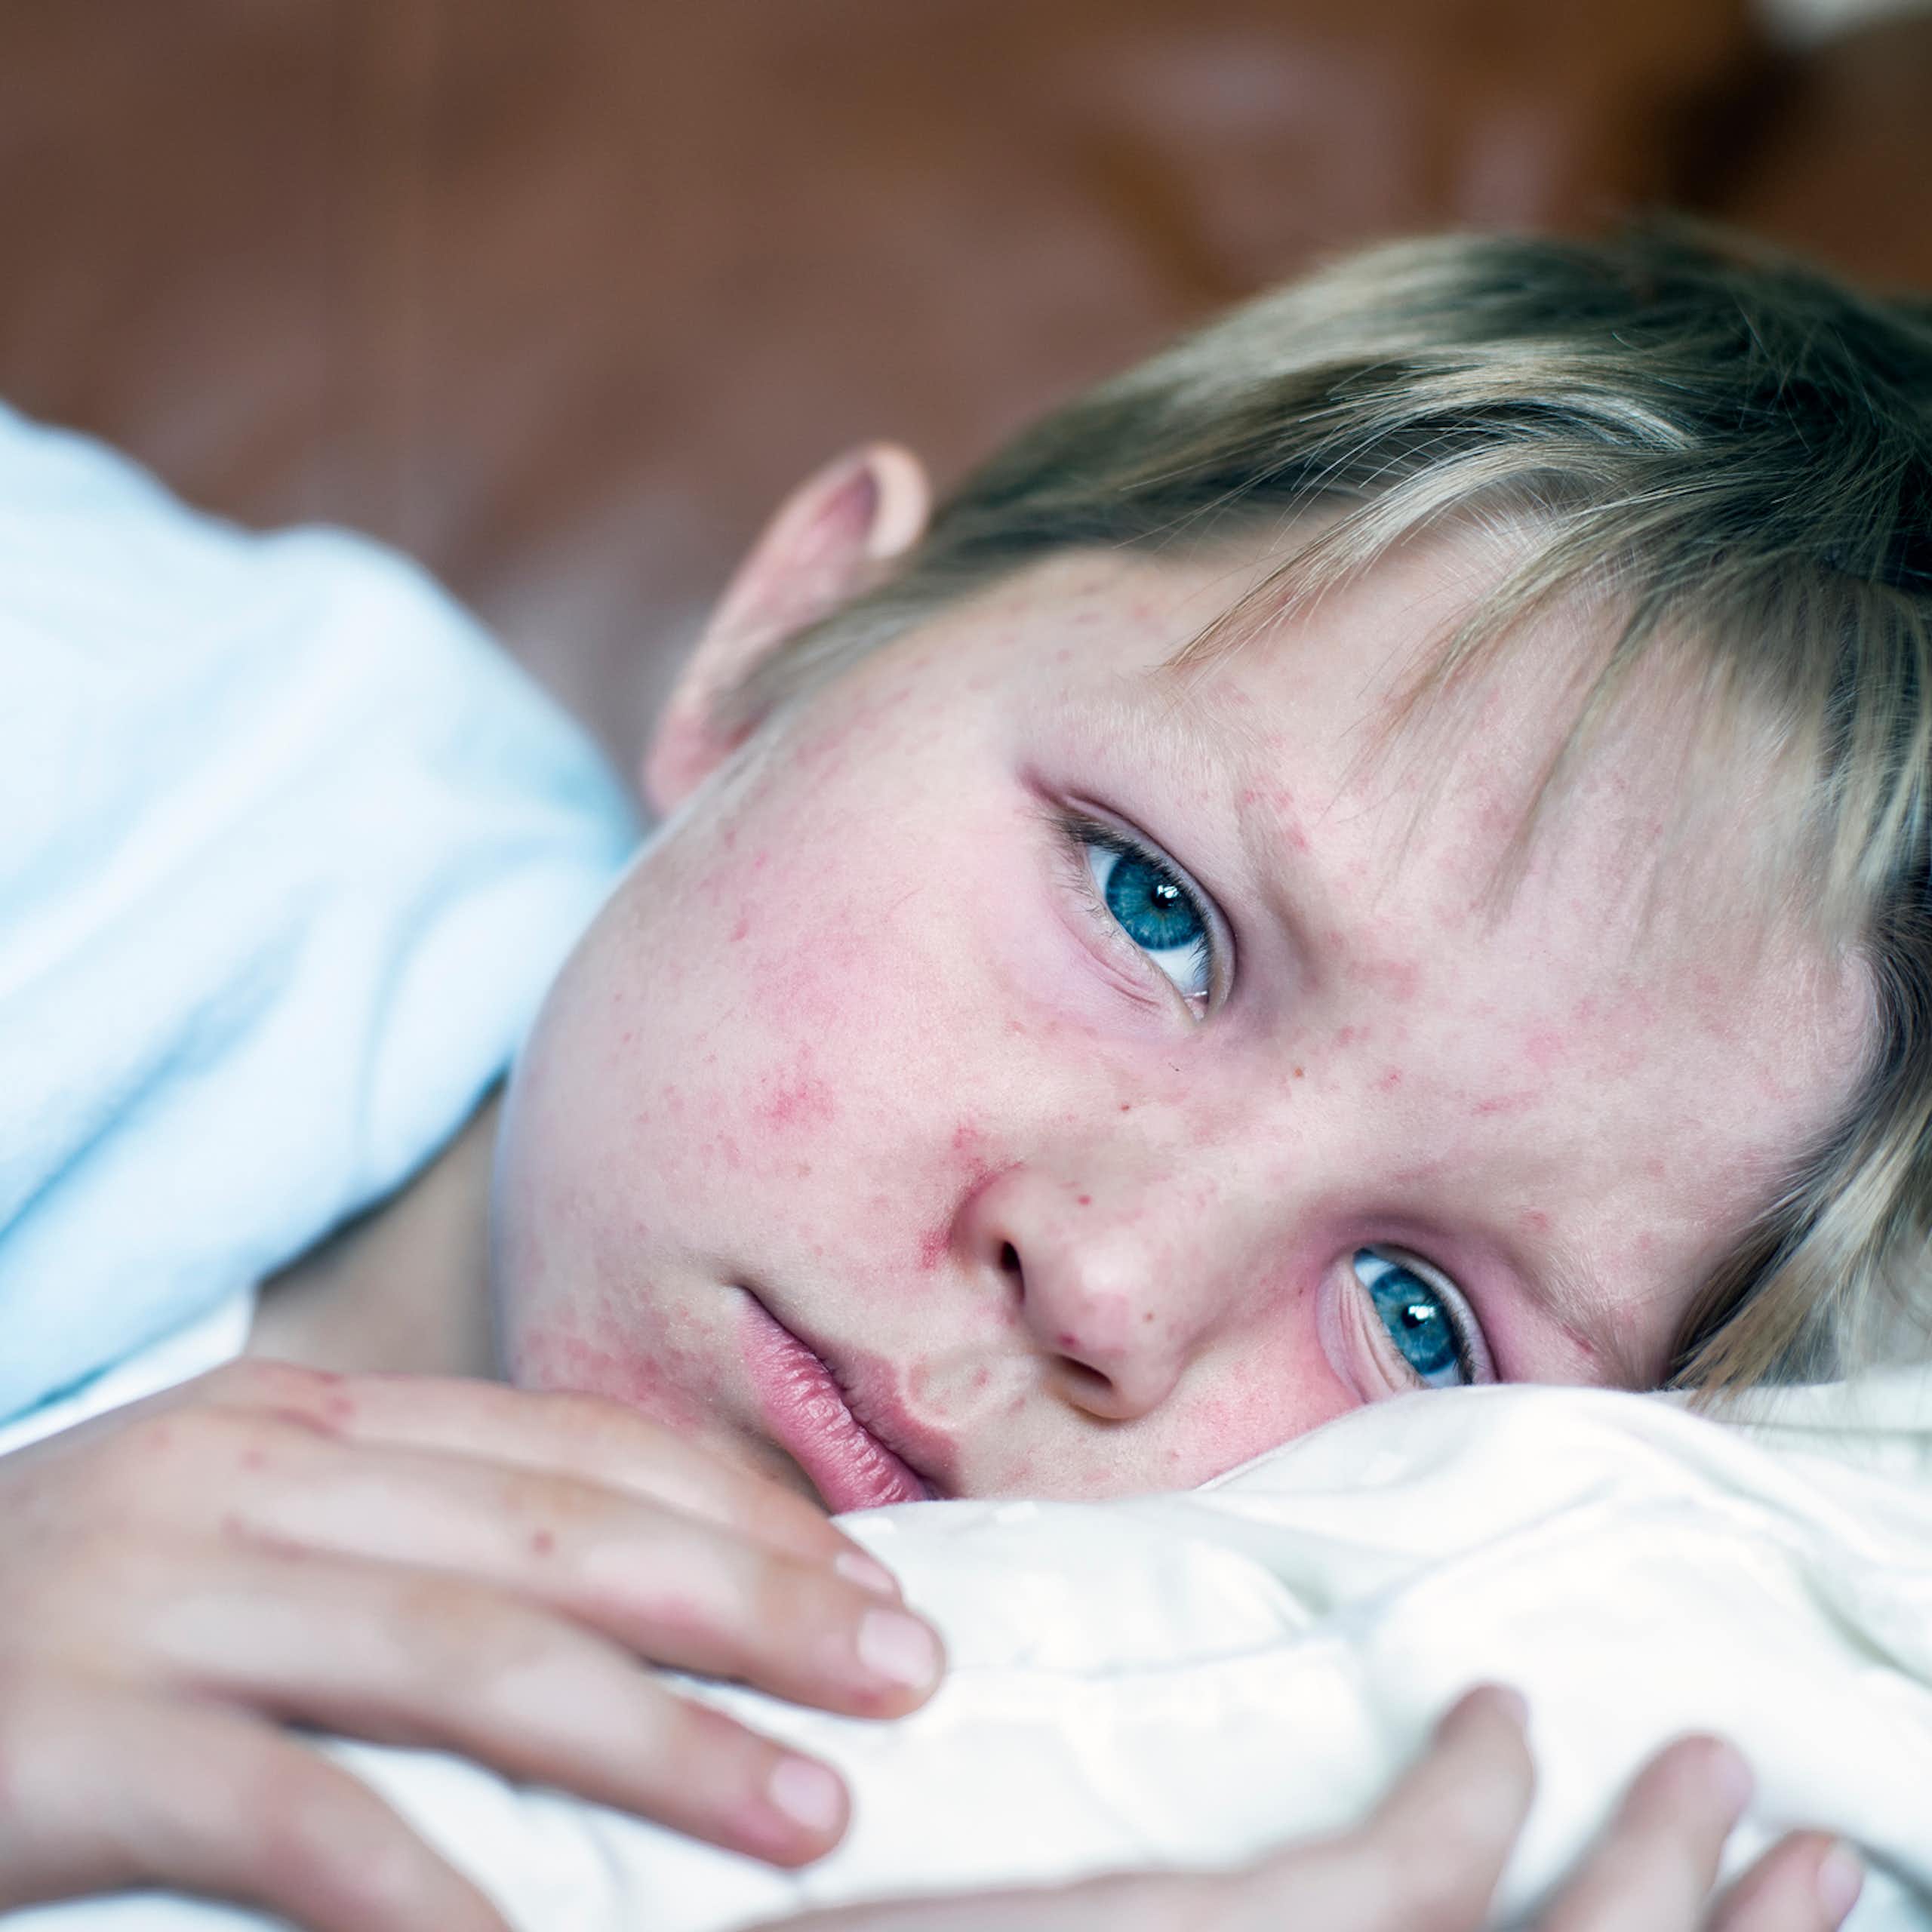 Child with red measles rash on face laying down on bed, looking at the viewer